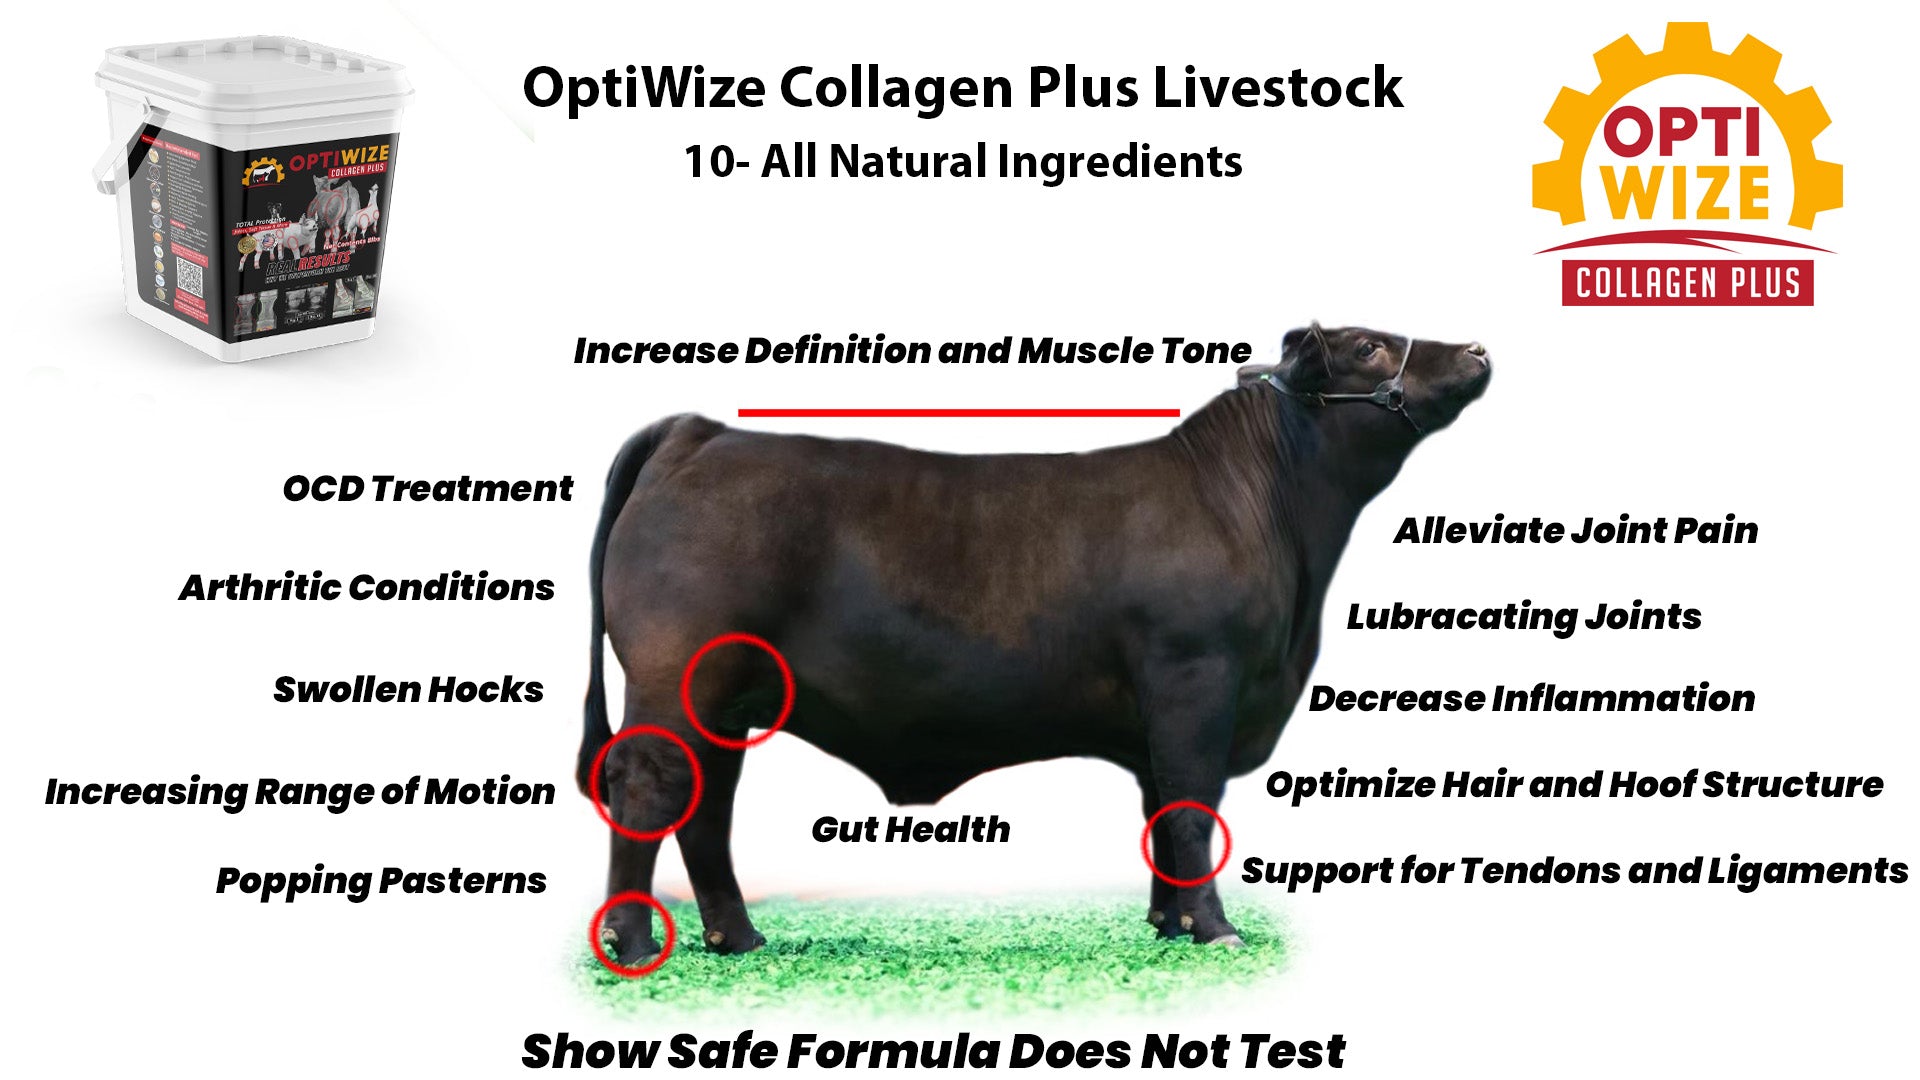 optiwize-livestock-showstock-infographic